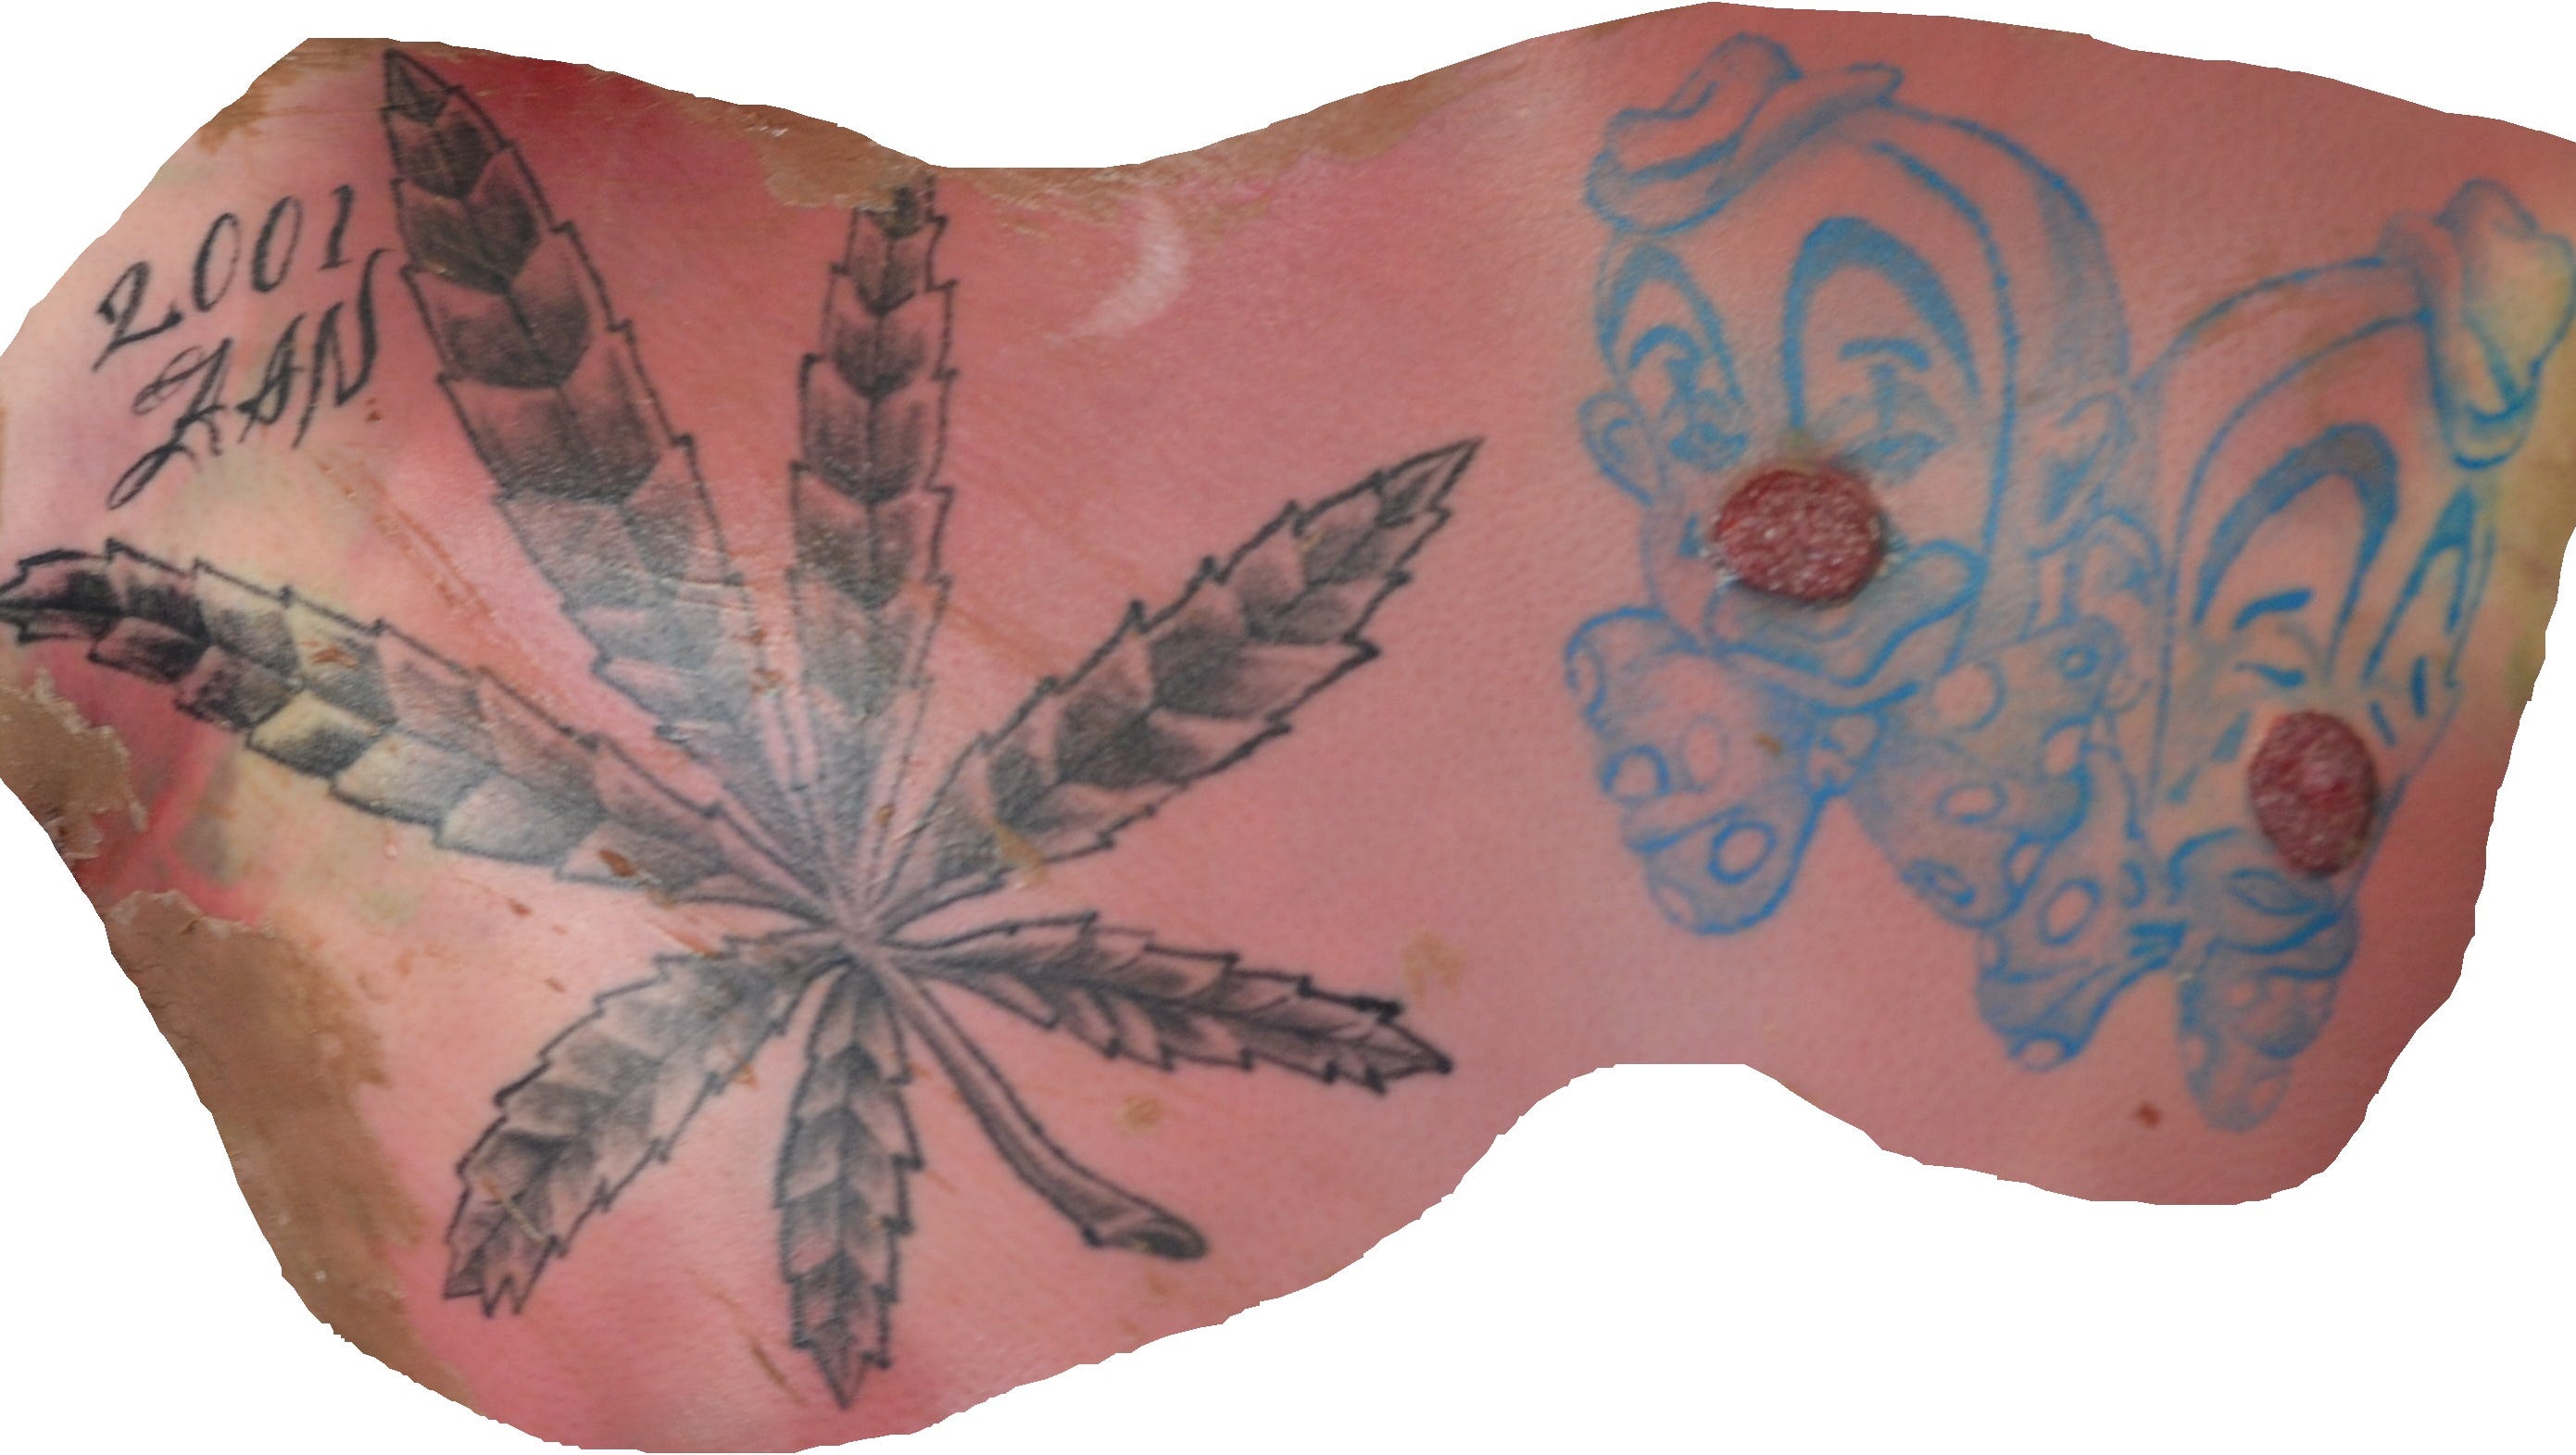 A tattoo on the body of an unidentified man found in the All-American Canal on March 10, 2016. Photo from John Doe Case #16-037.